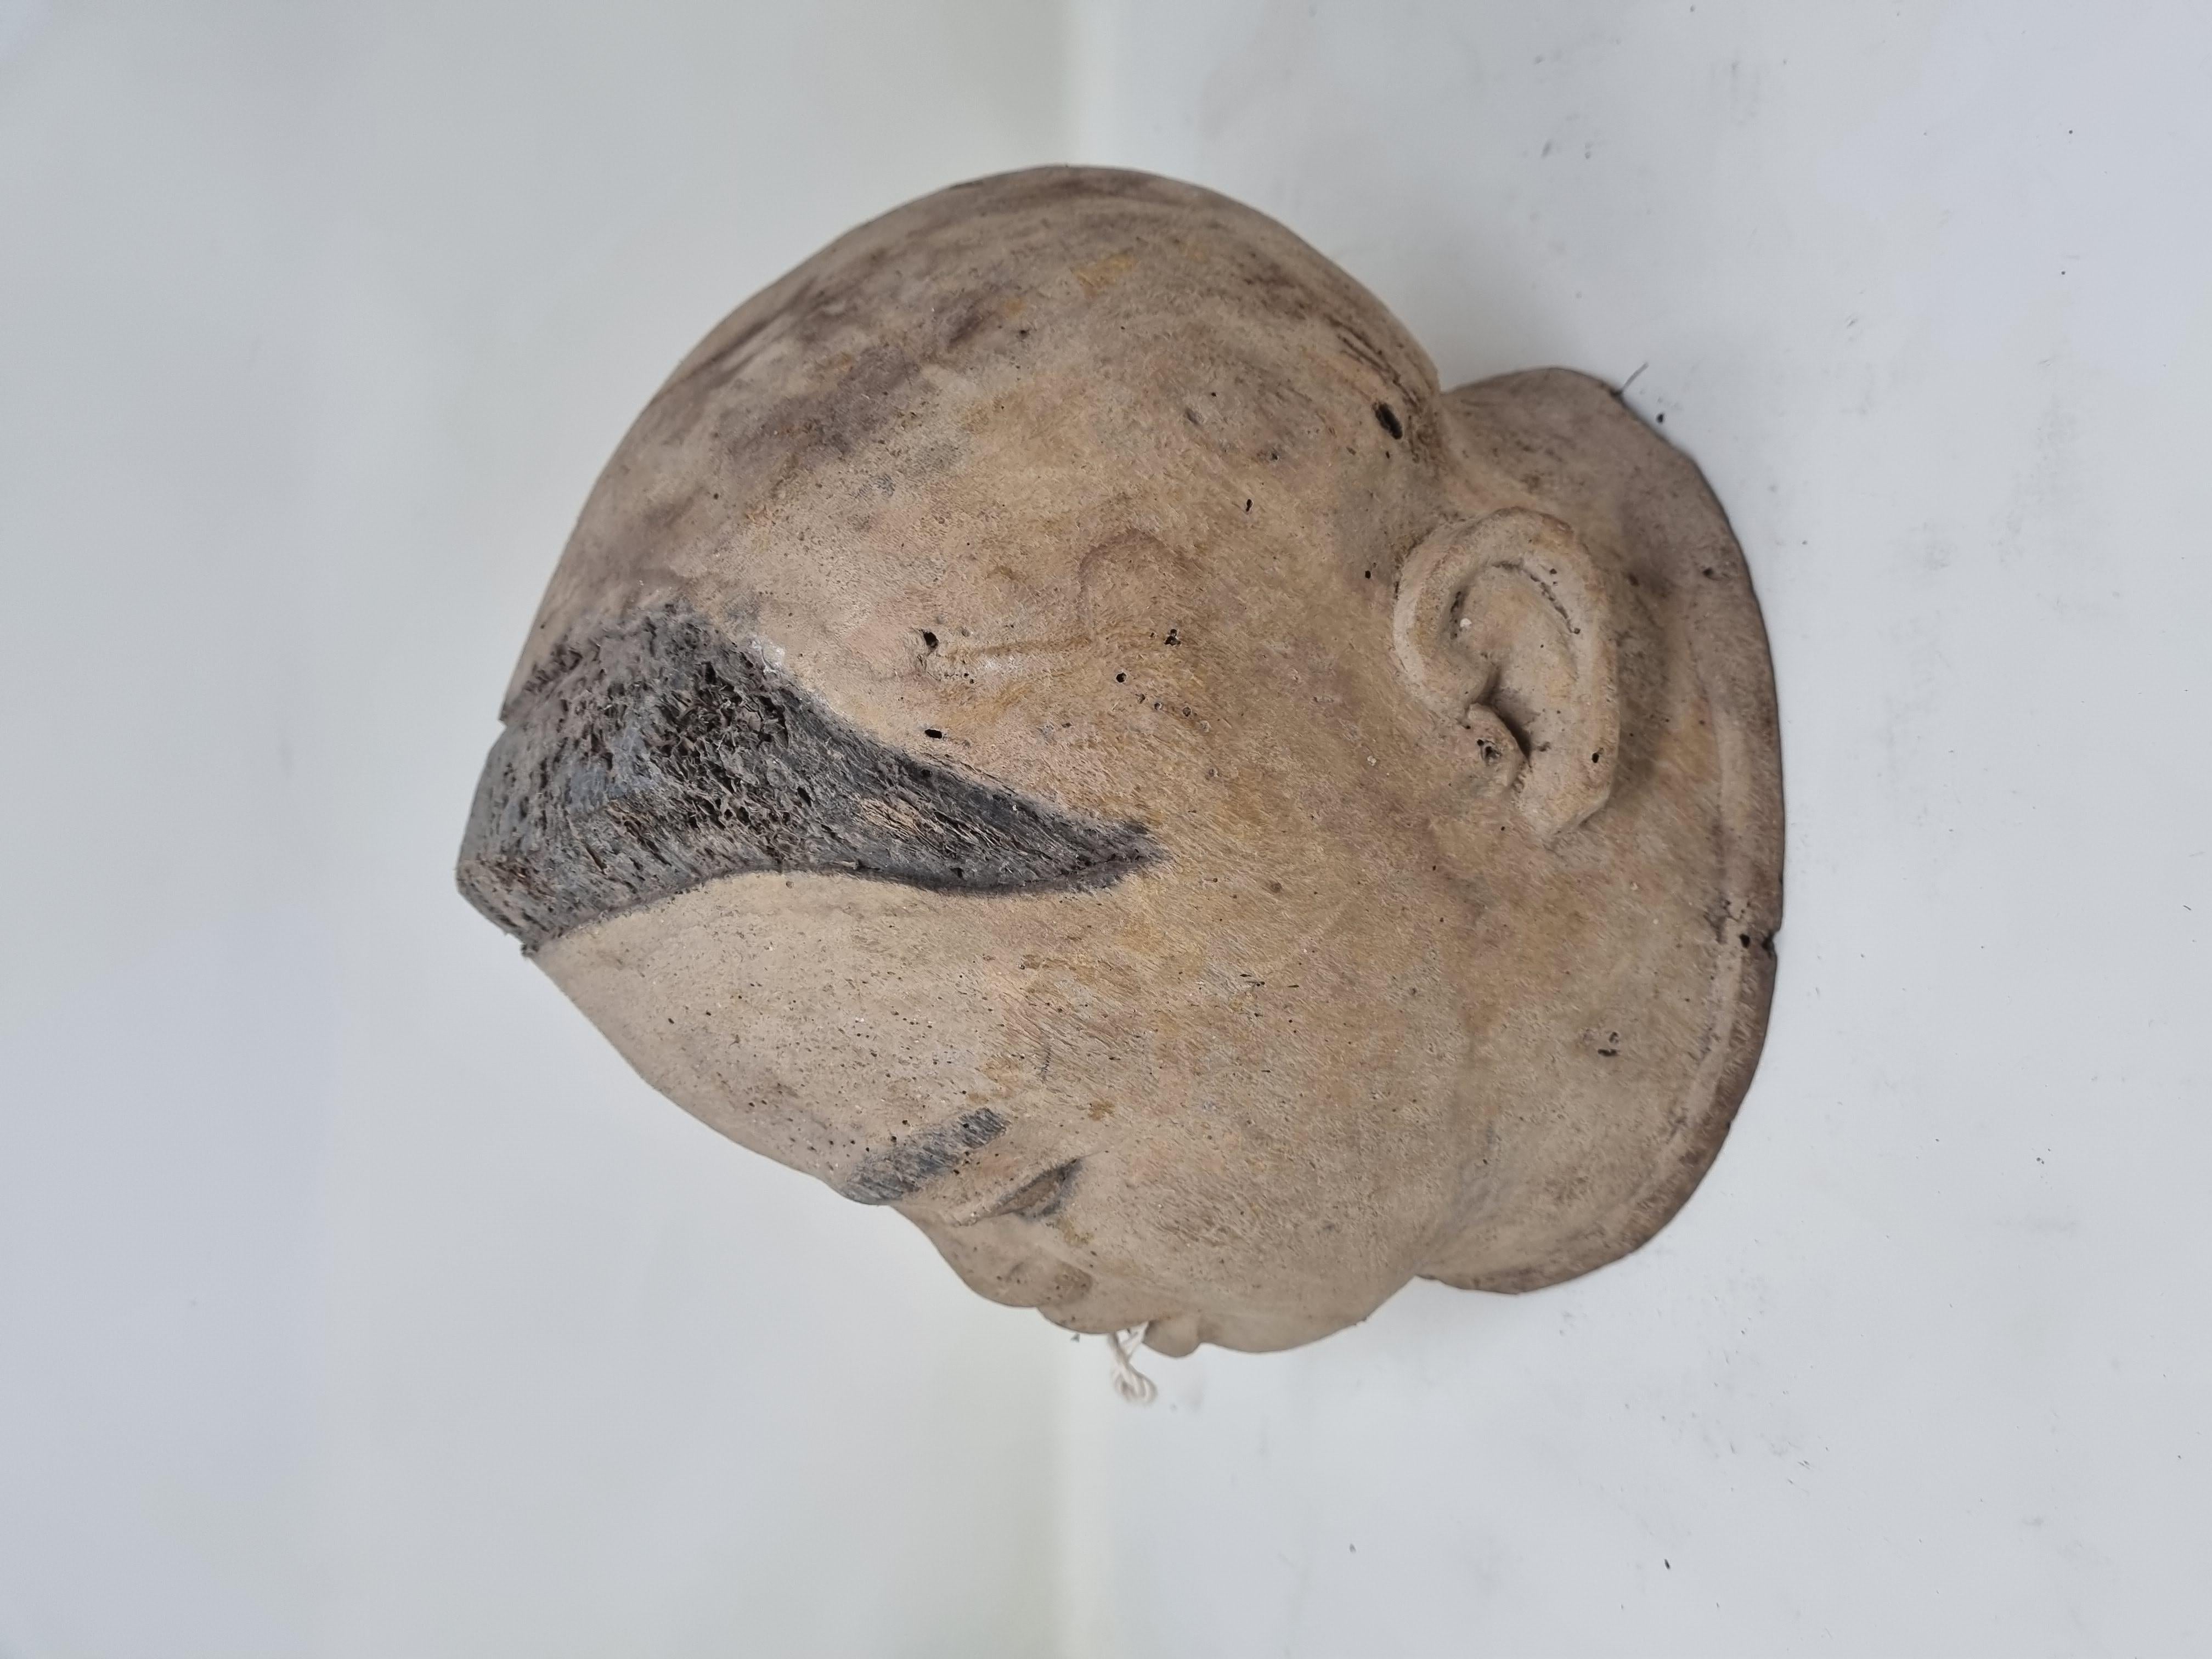 Makonde mask with delicate features
North East of Mozambique 1950s.